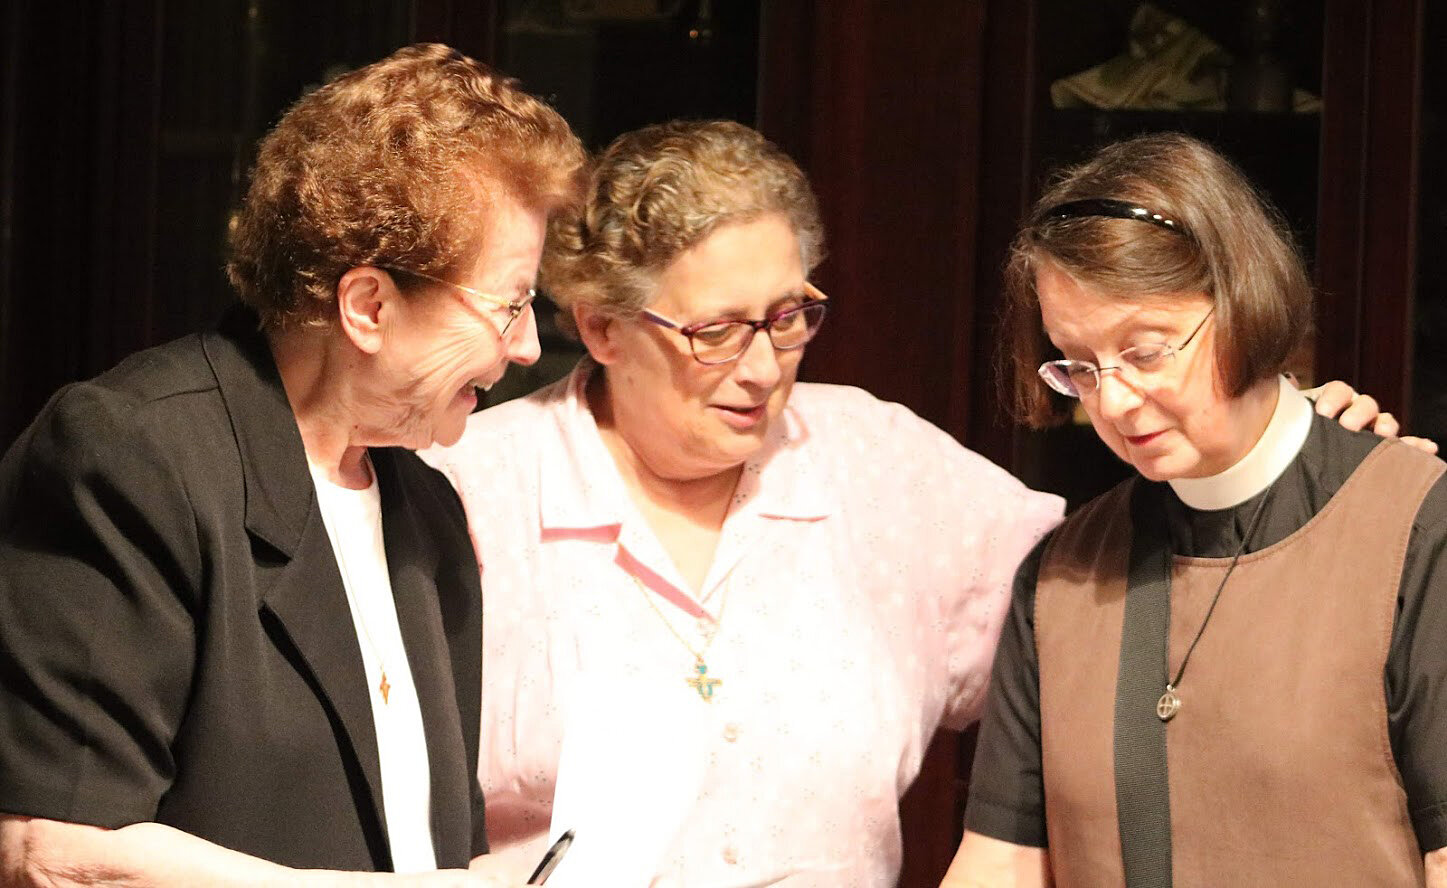  Sister Anita Kuchera (left) takes part in an interfaith prayer service at St. Francis Center for Renewal in Bethlehem, Pa., along with Sister Barbara DeStefano and Mother Laura Howell. 